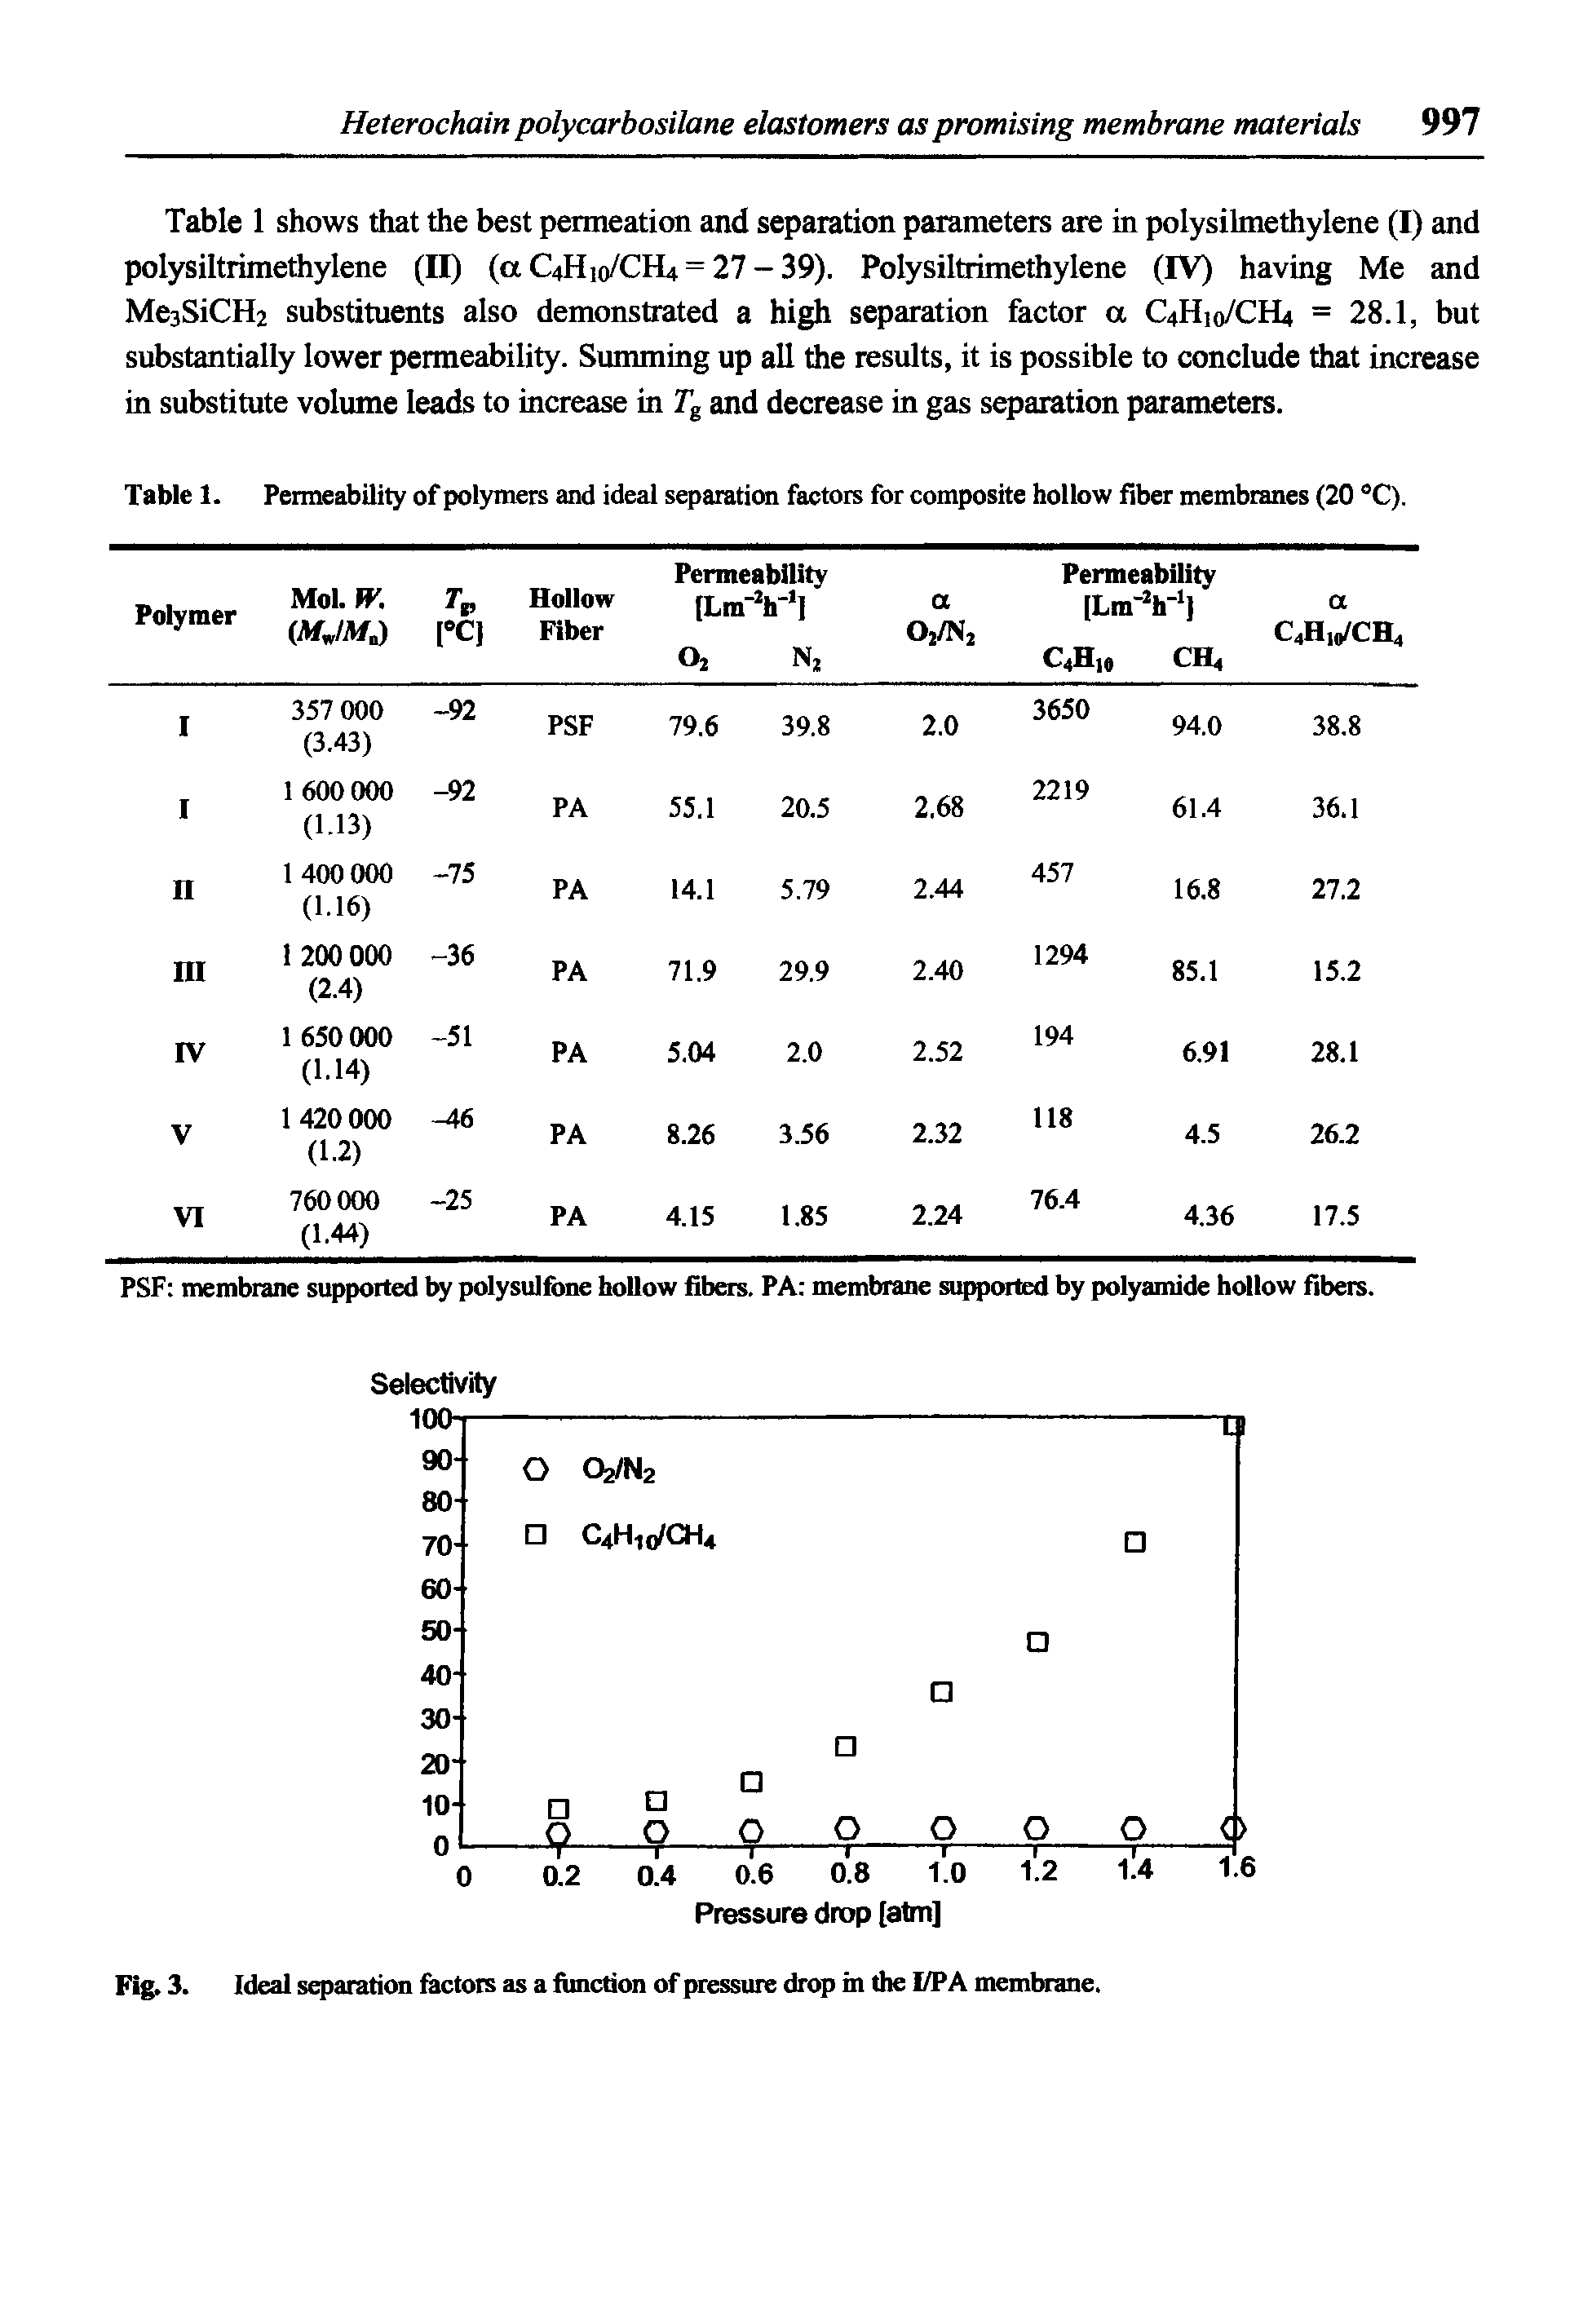 Table 1. Permeability of polymers and ideal separation factors for composite hollow fiber membranes (20 °C).